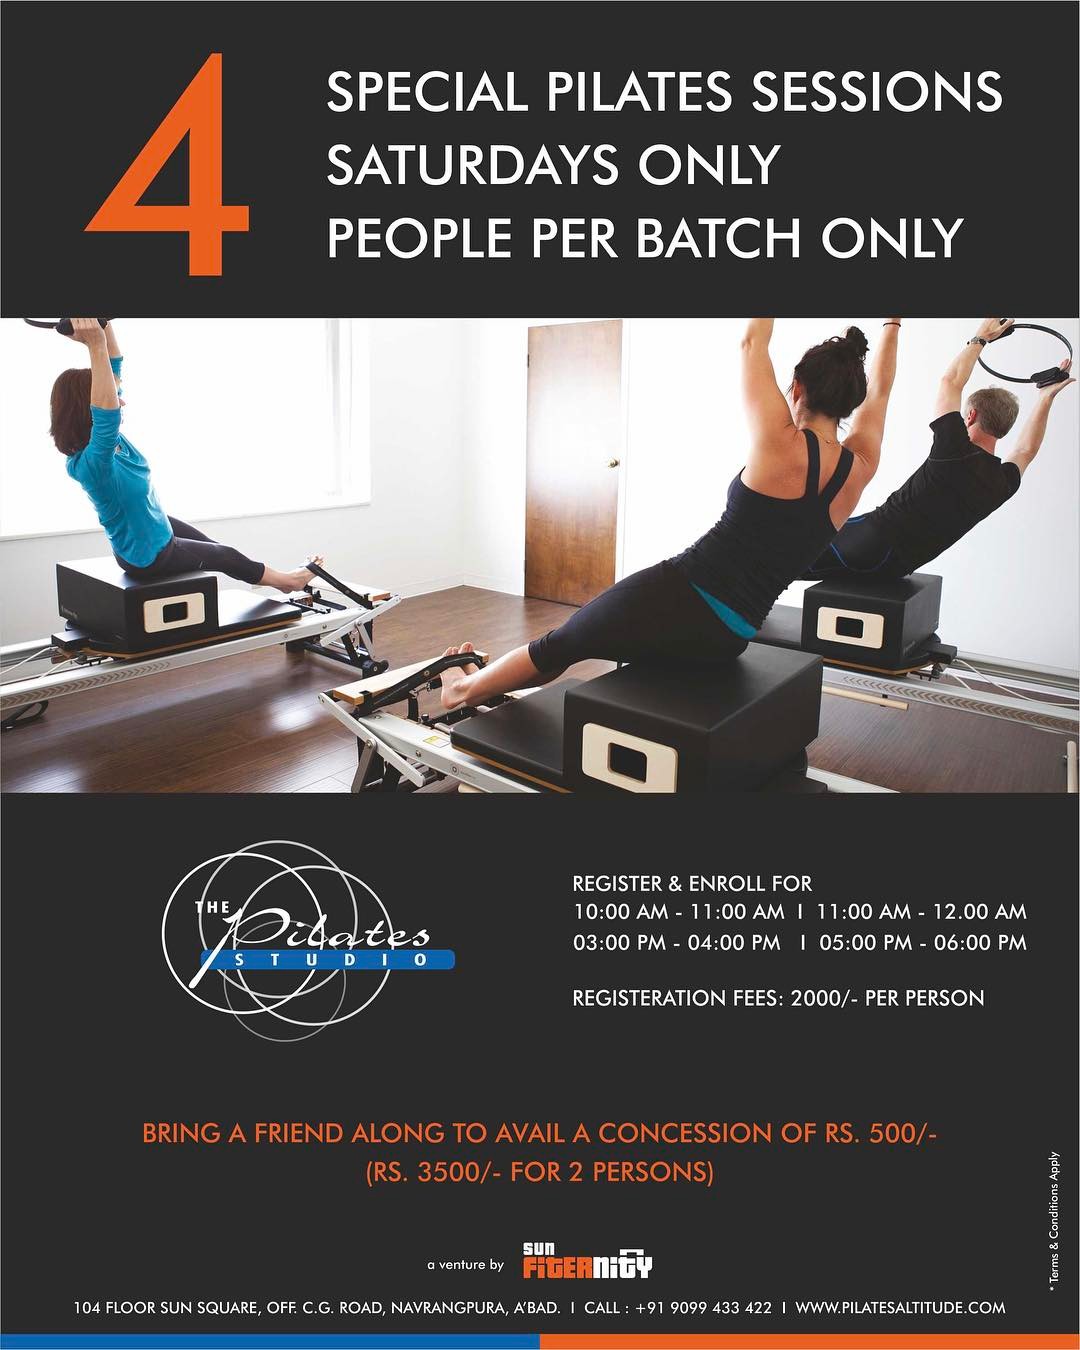 For all those Who have not been able to get a Spot for the Regular Pilates Classes, Here is an an opportunity to enroll into Special Weekend Batch ! .
.
Only 4 Saturdays for the Month of April and May. Batch Timings 10-11am, 11-12pm, 3-4pm, 5-6pm. .
.
Only 4 people per class. Hurry book your slot today. Starts this Saturday 8th April Onwards!!! #.
.
.
#weekendworkout #weekendspecial #pilates #PilatesGirl #realmendopilates #fitness #fitspo #fitnessgoals #summers #fitnessstudio #pilatesstudio #nowinahmedabad